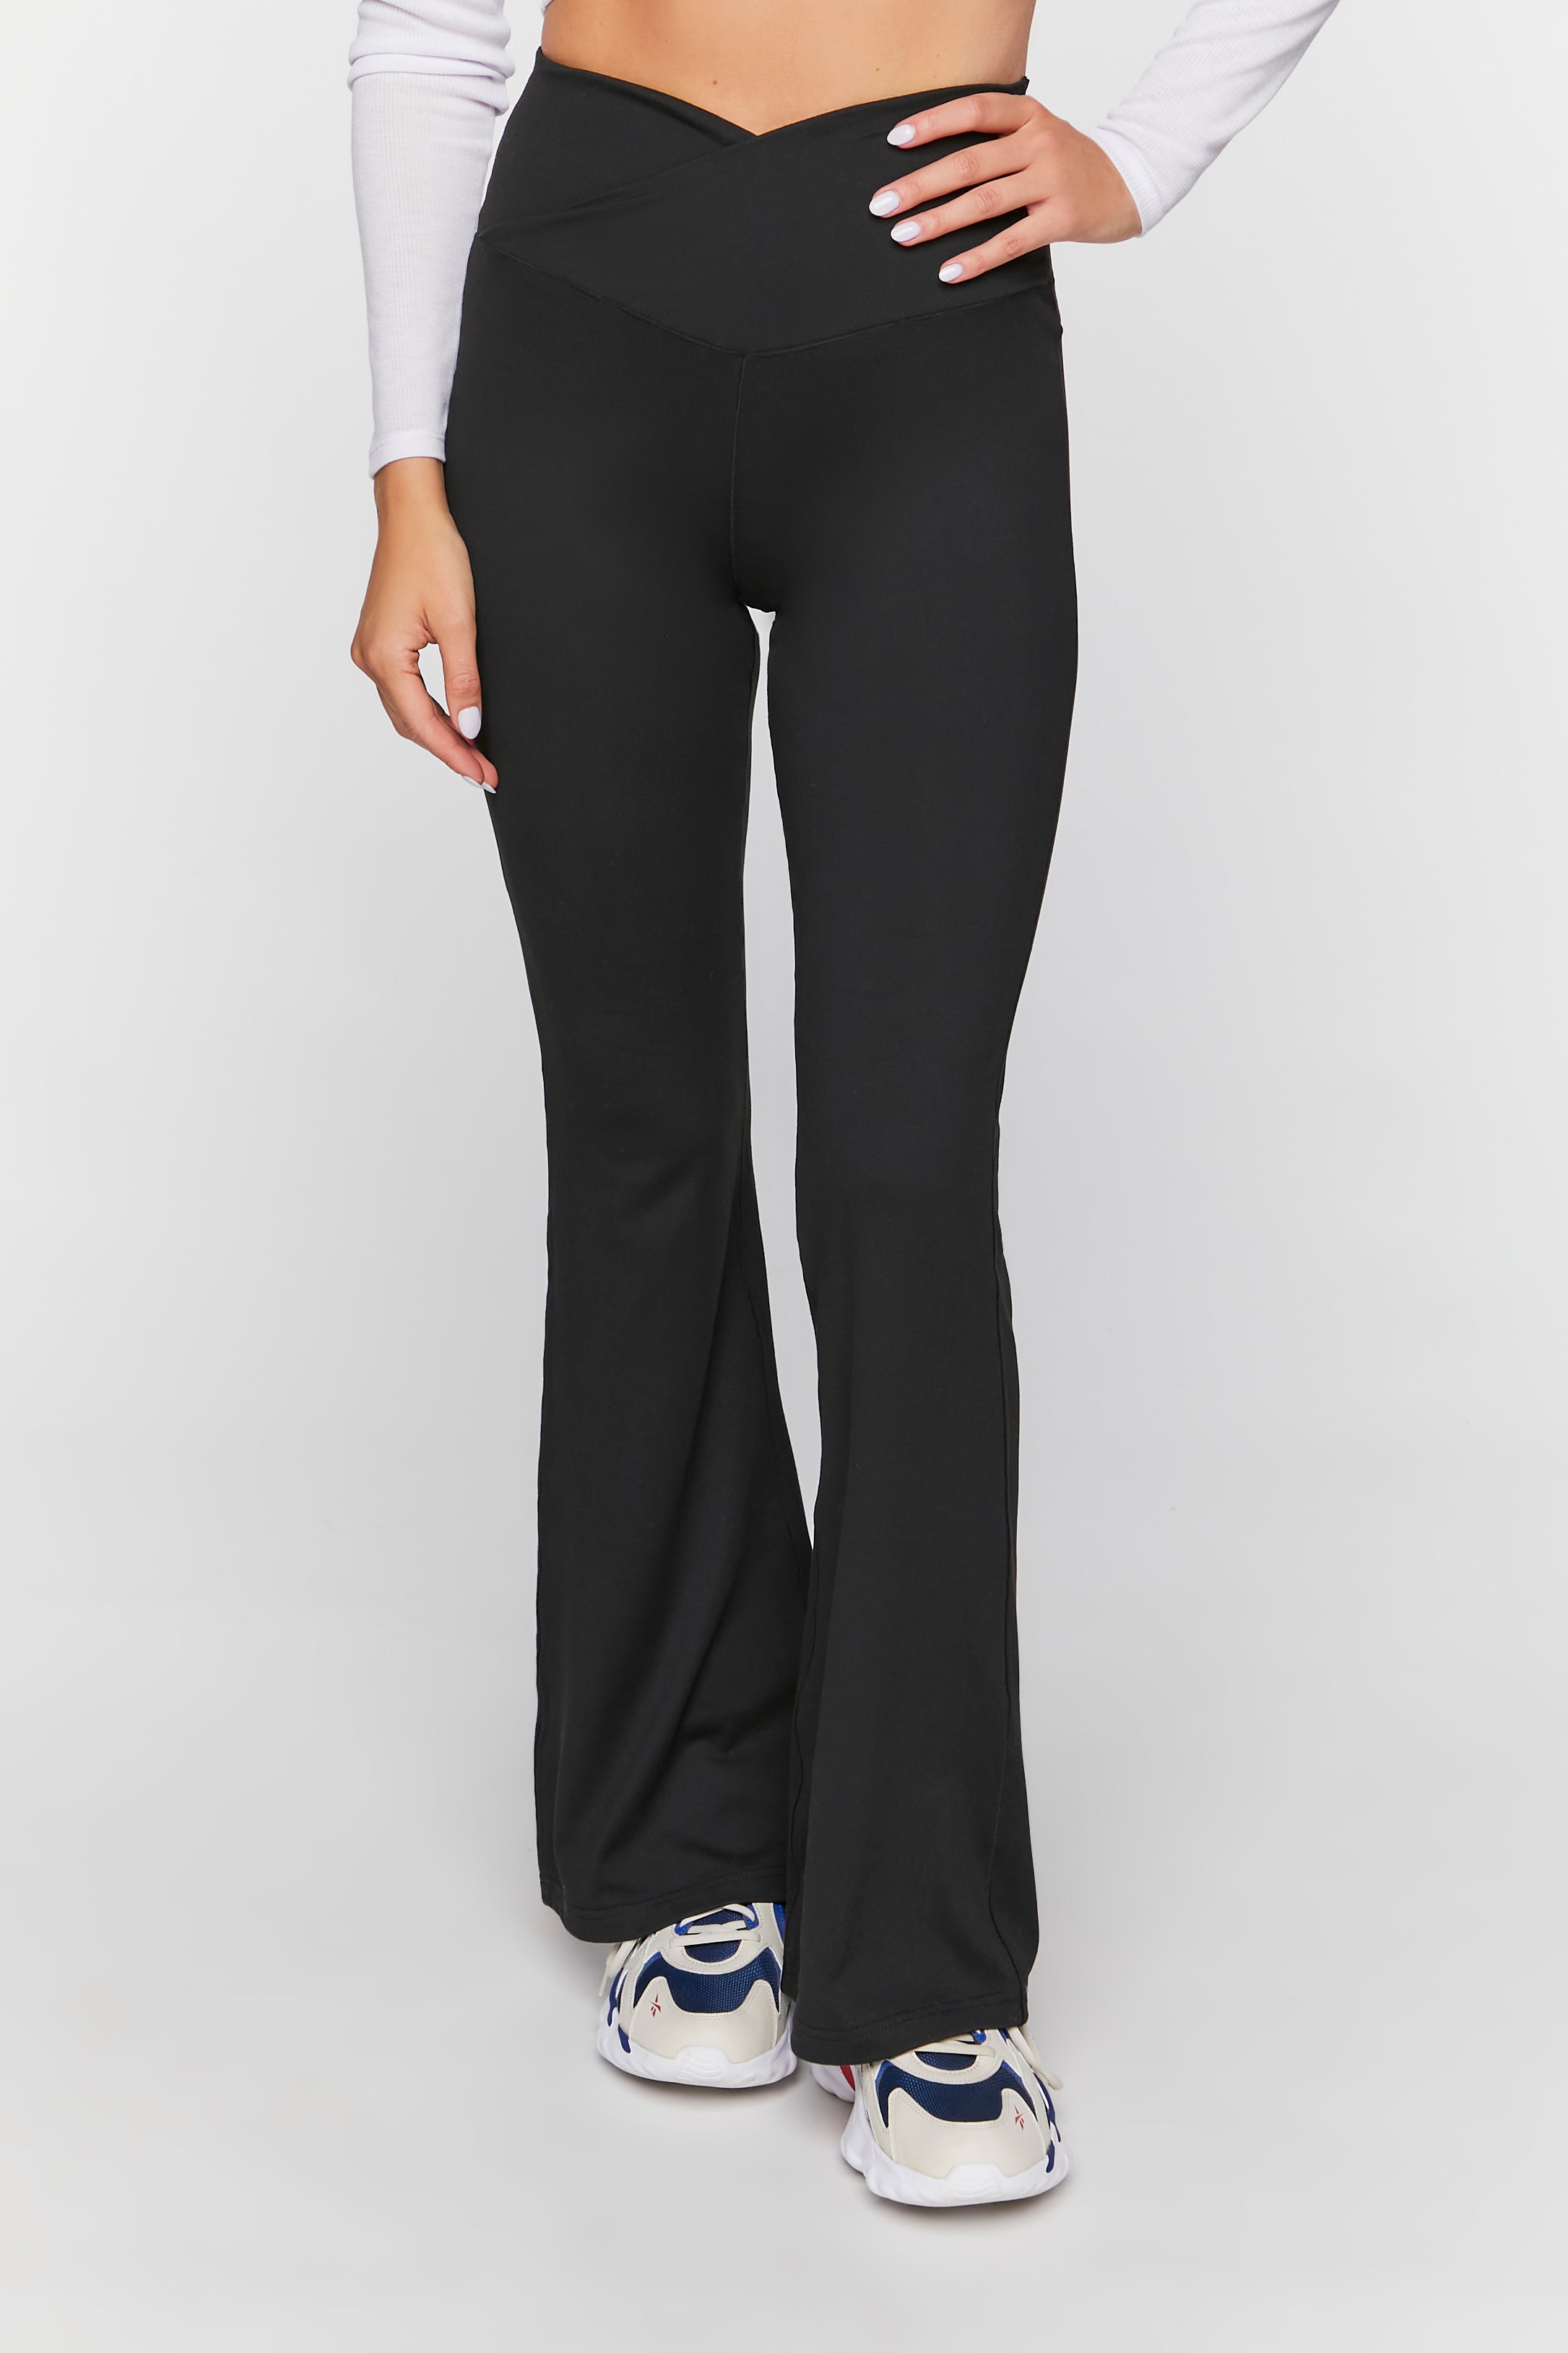 Shop For Active Crossover Seamless Flare Leggings